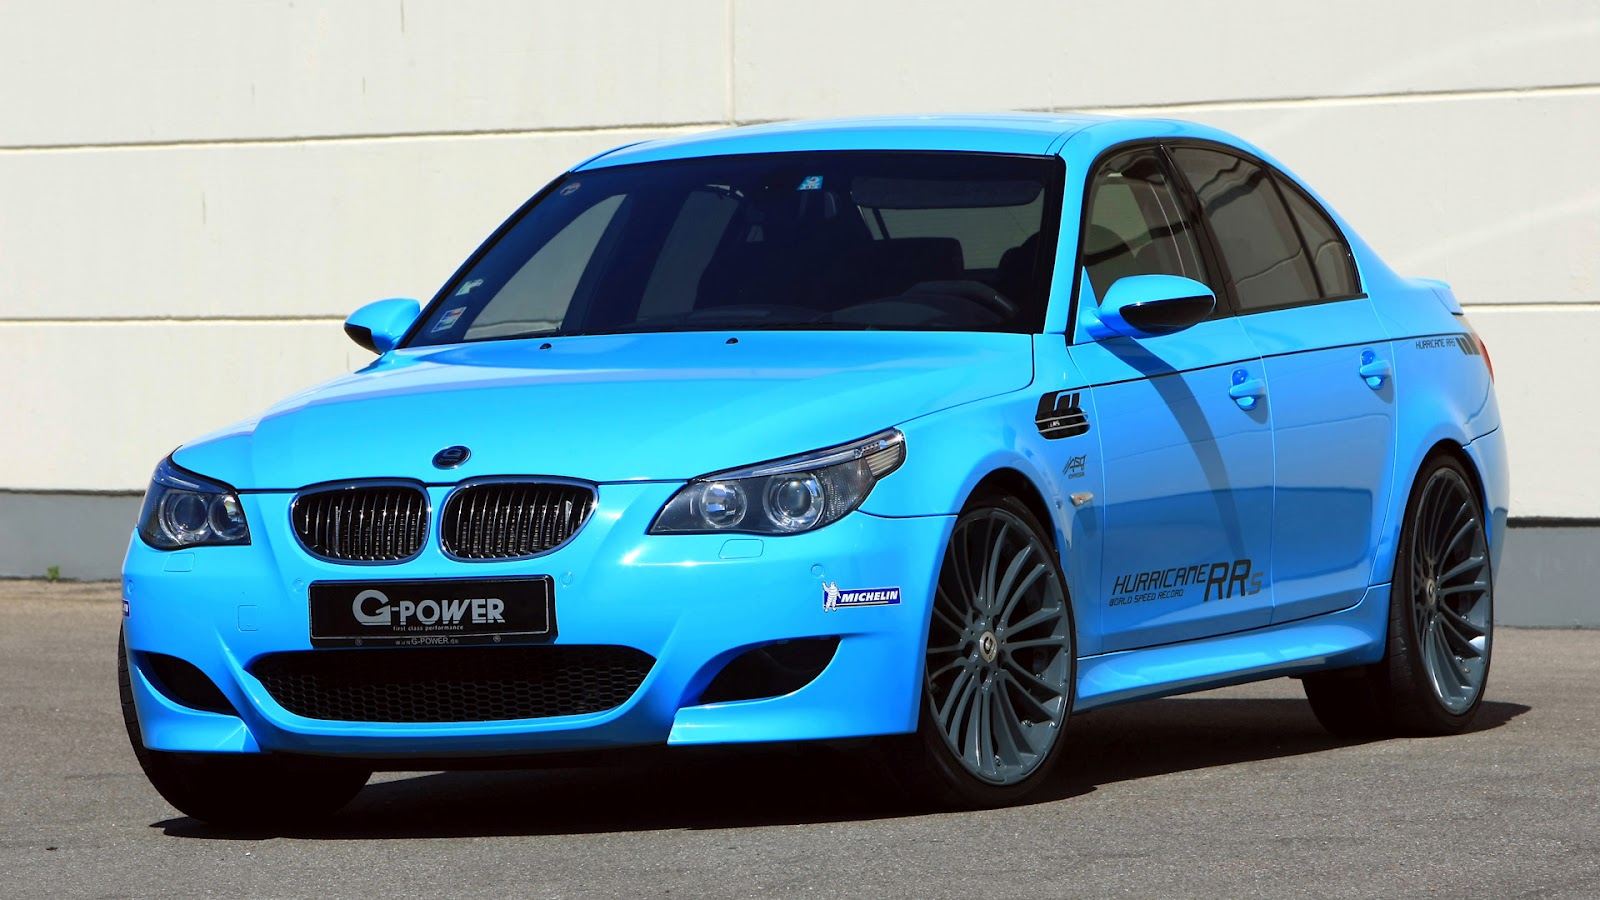 Car Wallpapers in Good Images: 2012 G-Power BMW M5 Hurricane RRs V10 .